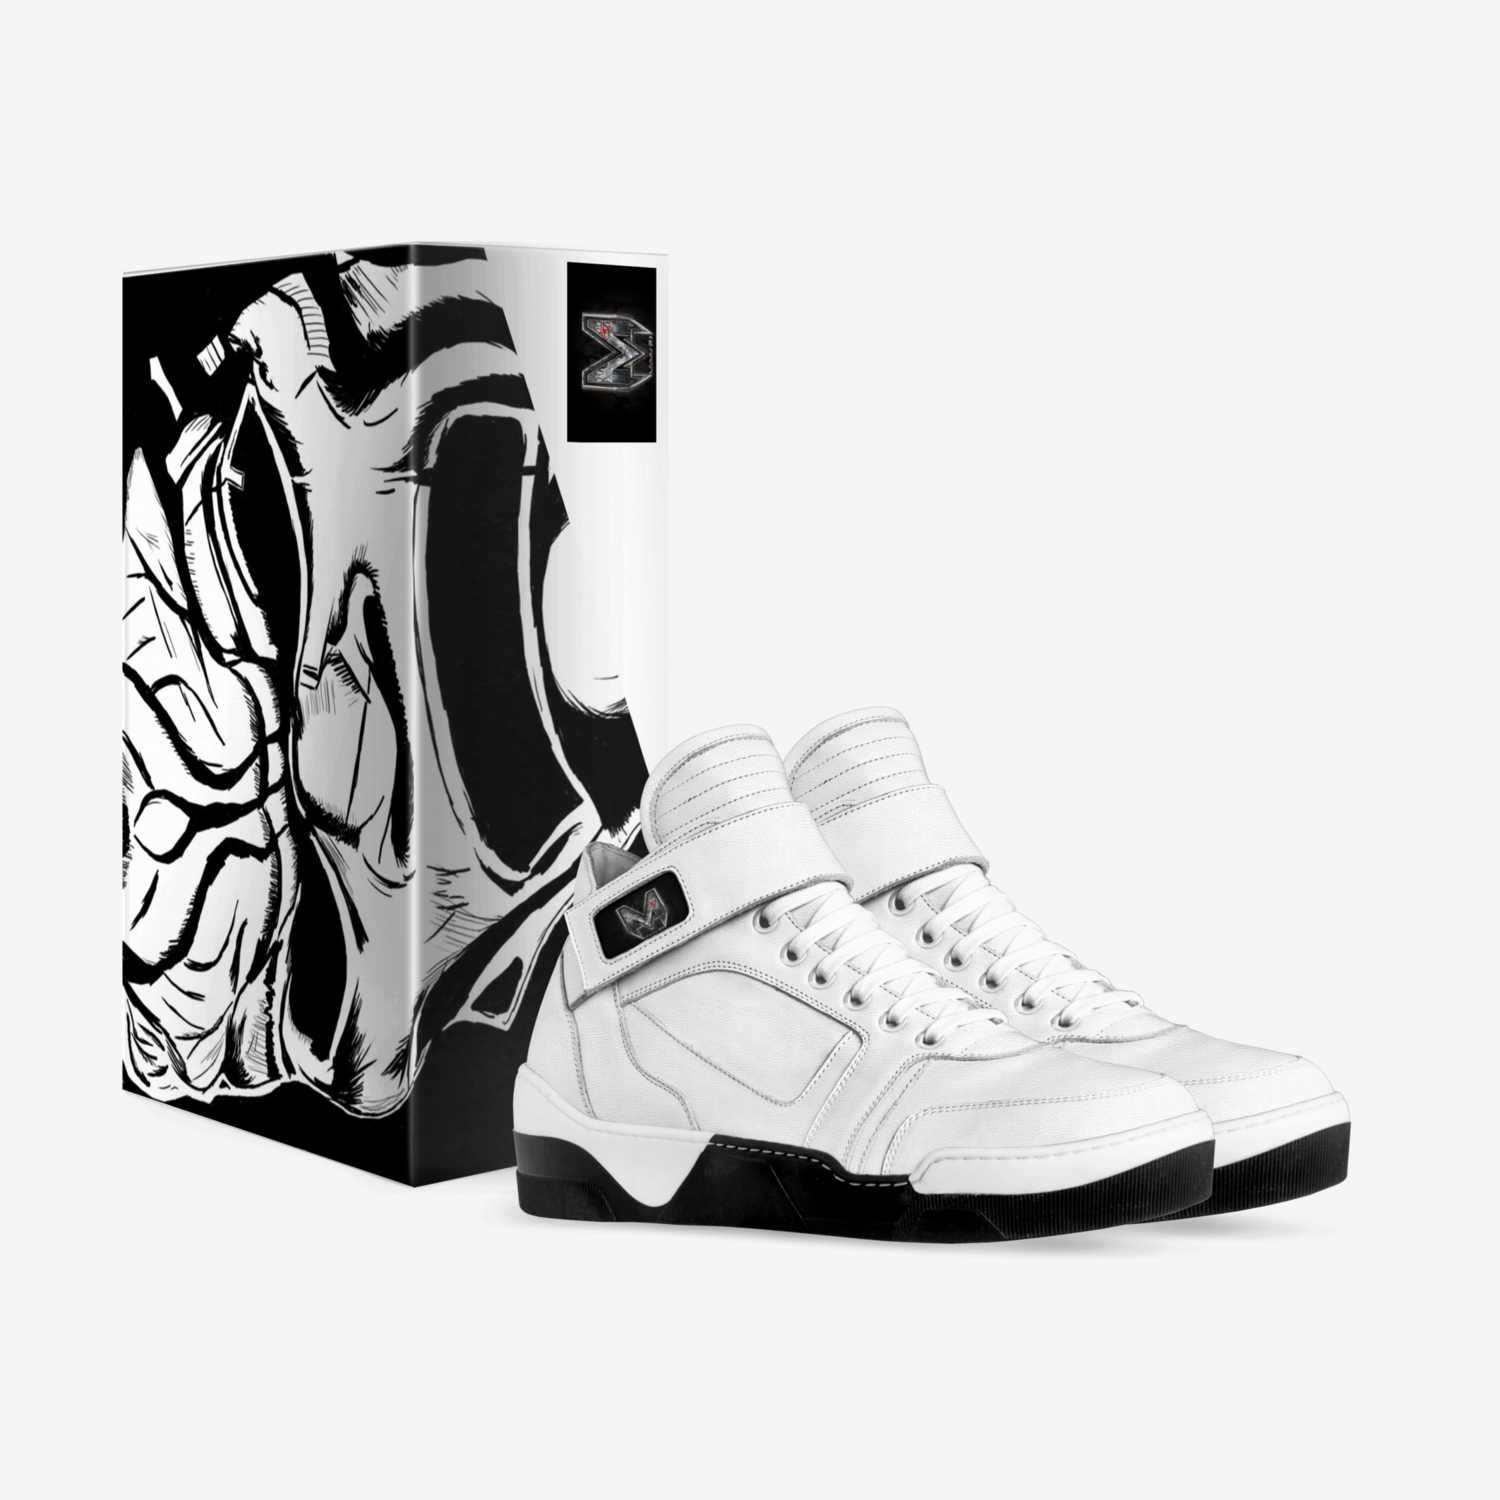 THE GOD MUMM RA custom made in Italy shoes by Jose Vazquez | Box view